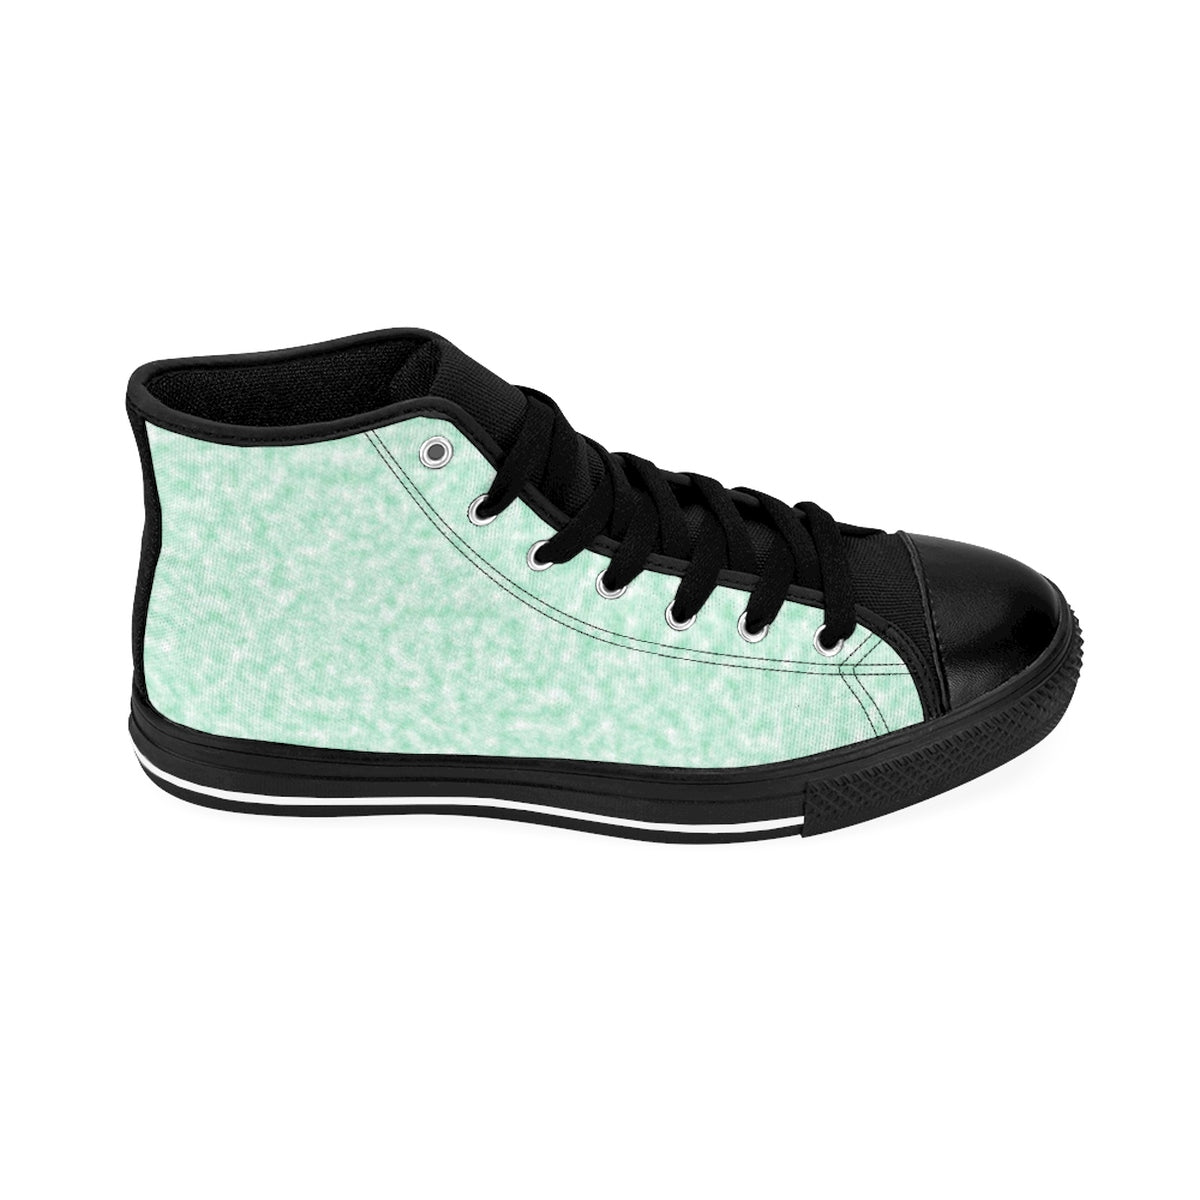 Seafoam Green and White Clouds Women's High-top Sneakers